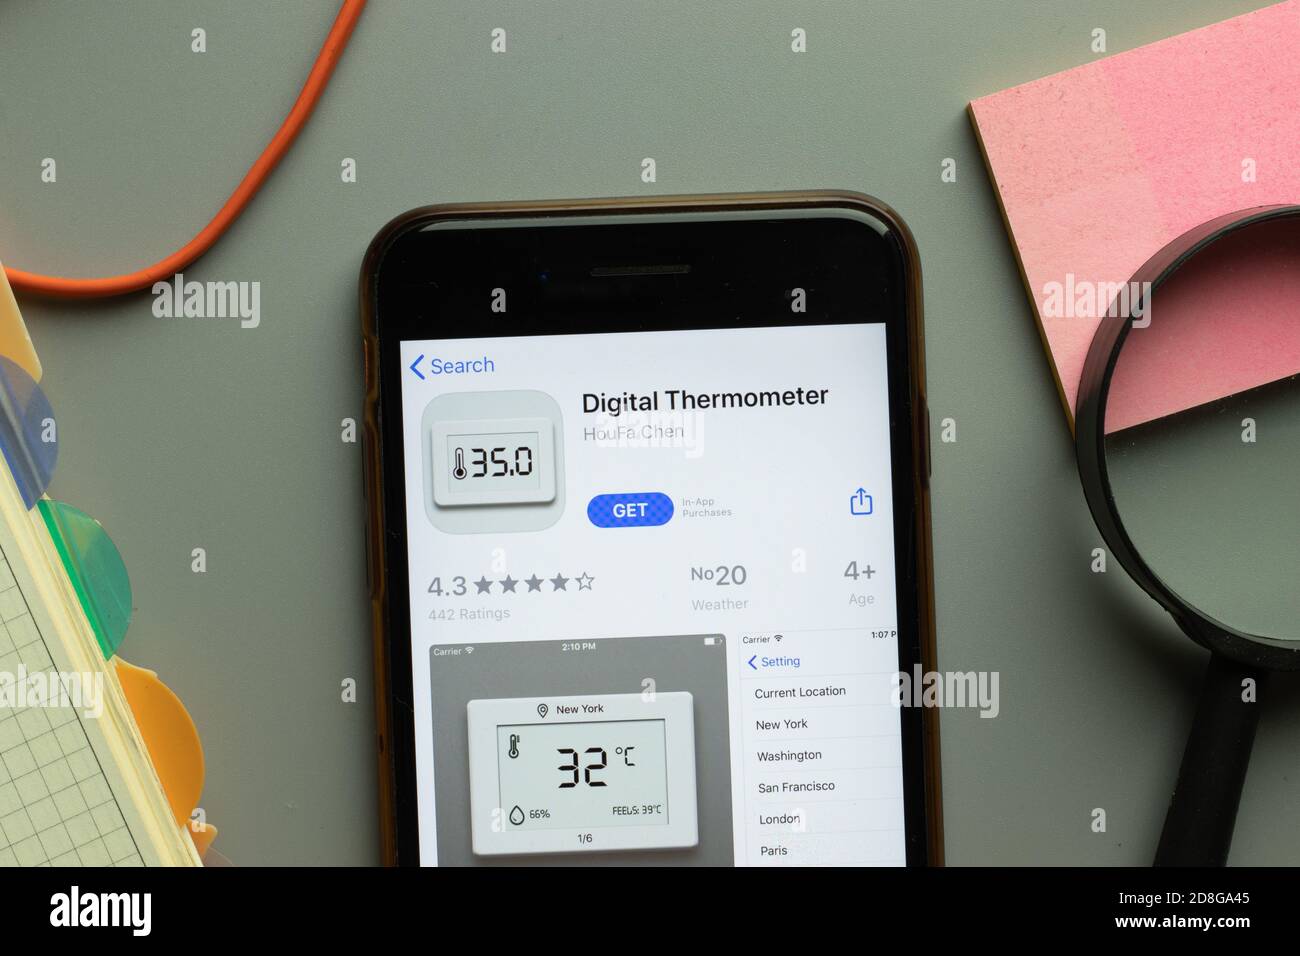 New York, USA - 26 October 2020: Digital Thermometer mobile app logo on phone screen close up, Illustrative Editorial Stock Photo